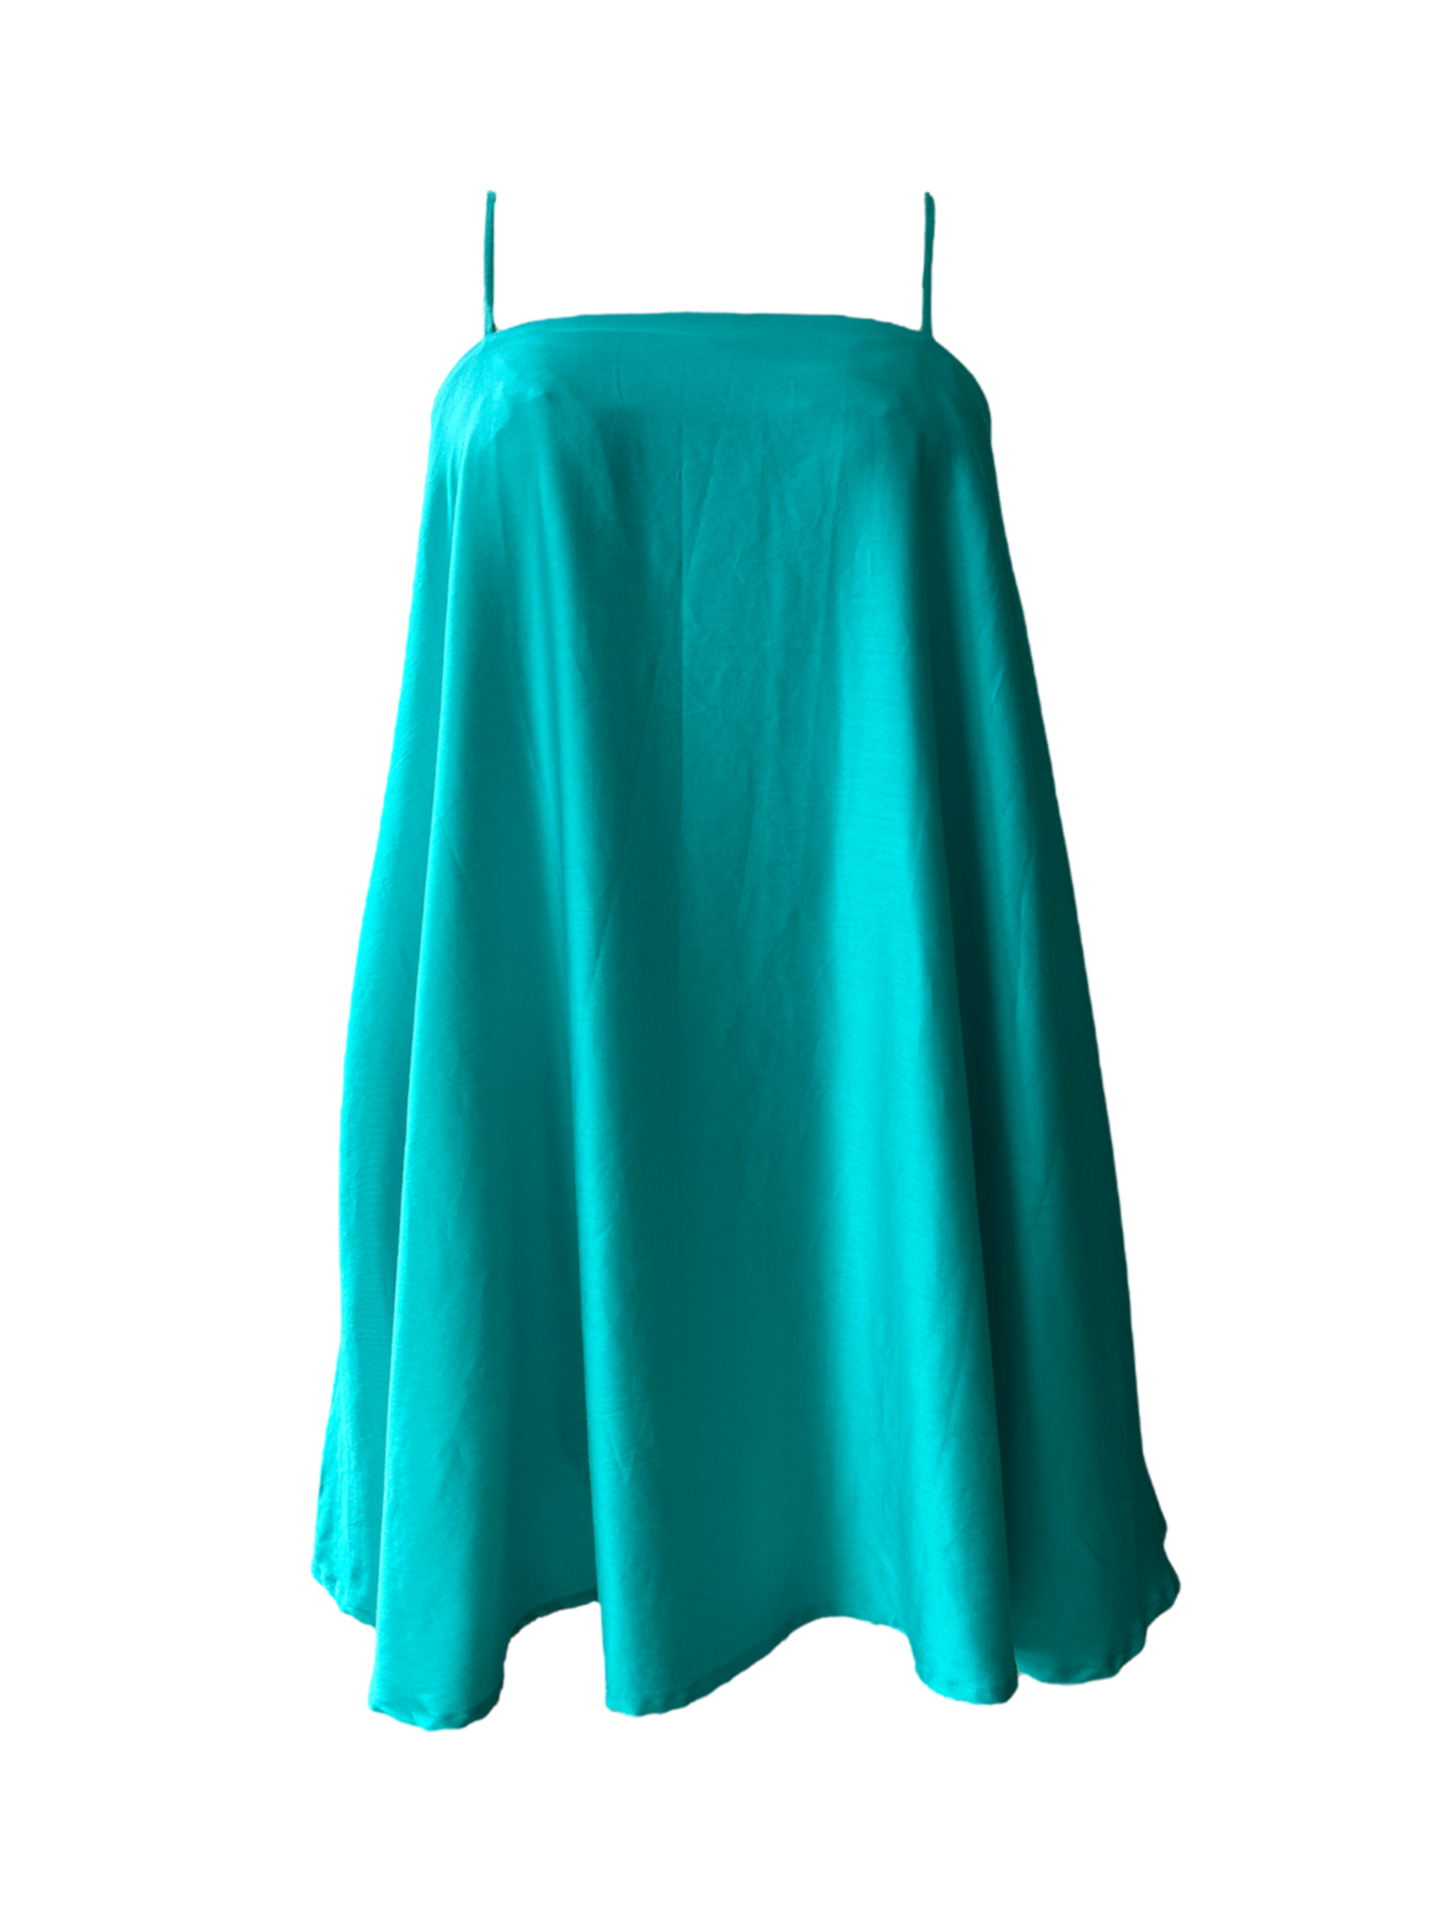 a turquoise color flare tent spaghetti strap dress from adrina fanore